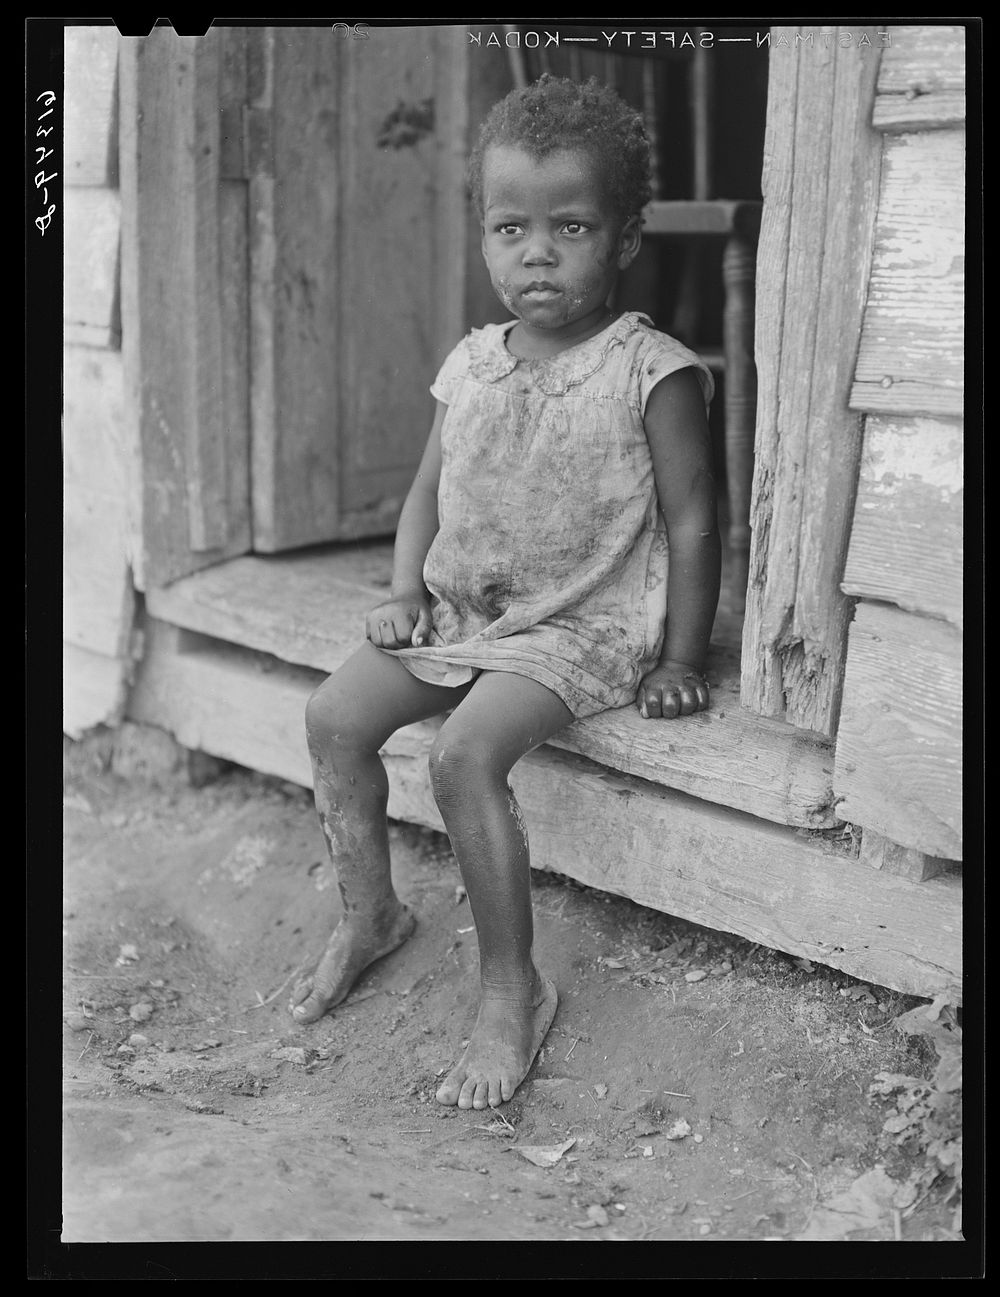 Daughter of Edward Gant, FSA (Farm Security Administration) borrower. Saint Mary's County, Maryland. Sourced from the…